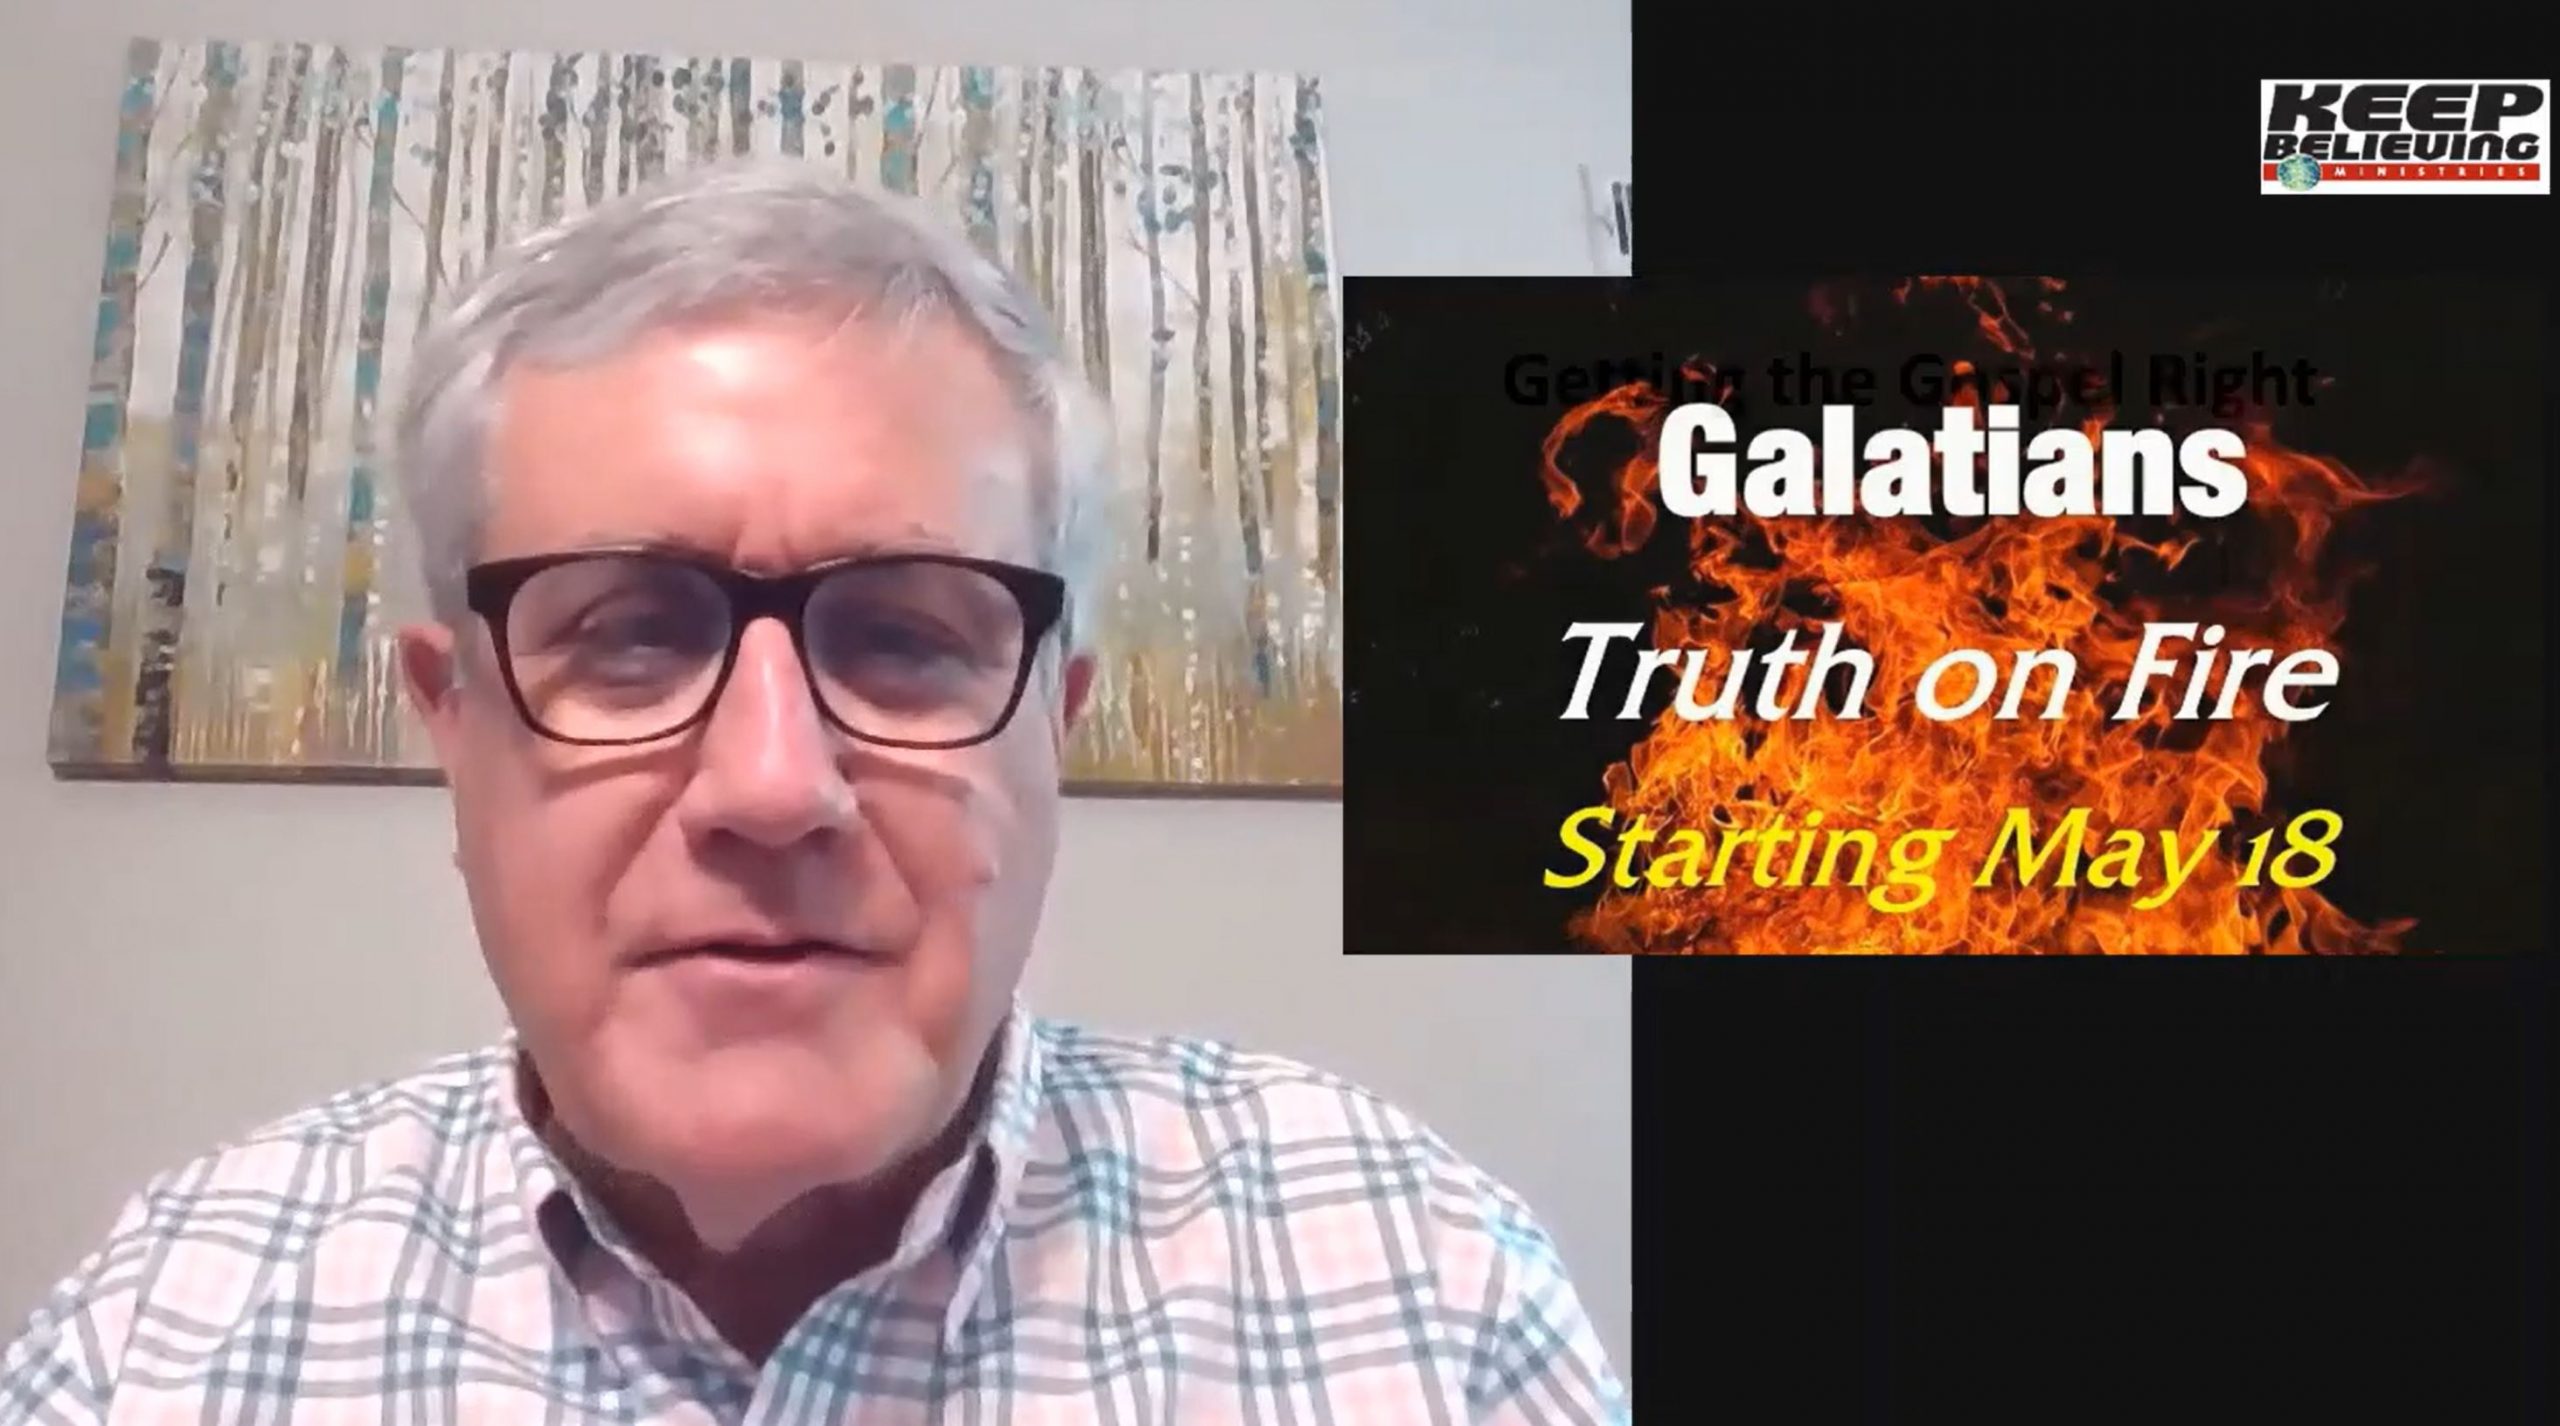 A 73-Second Invitation to “Galatians: Truth on Fire”